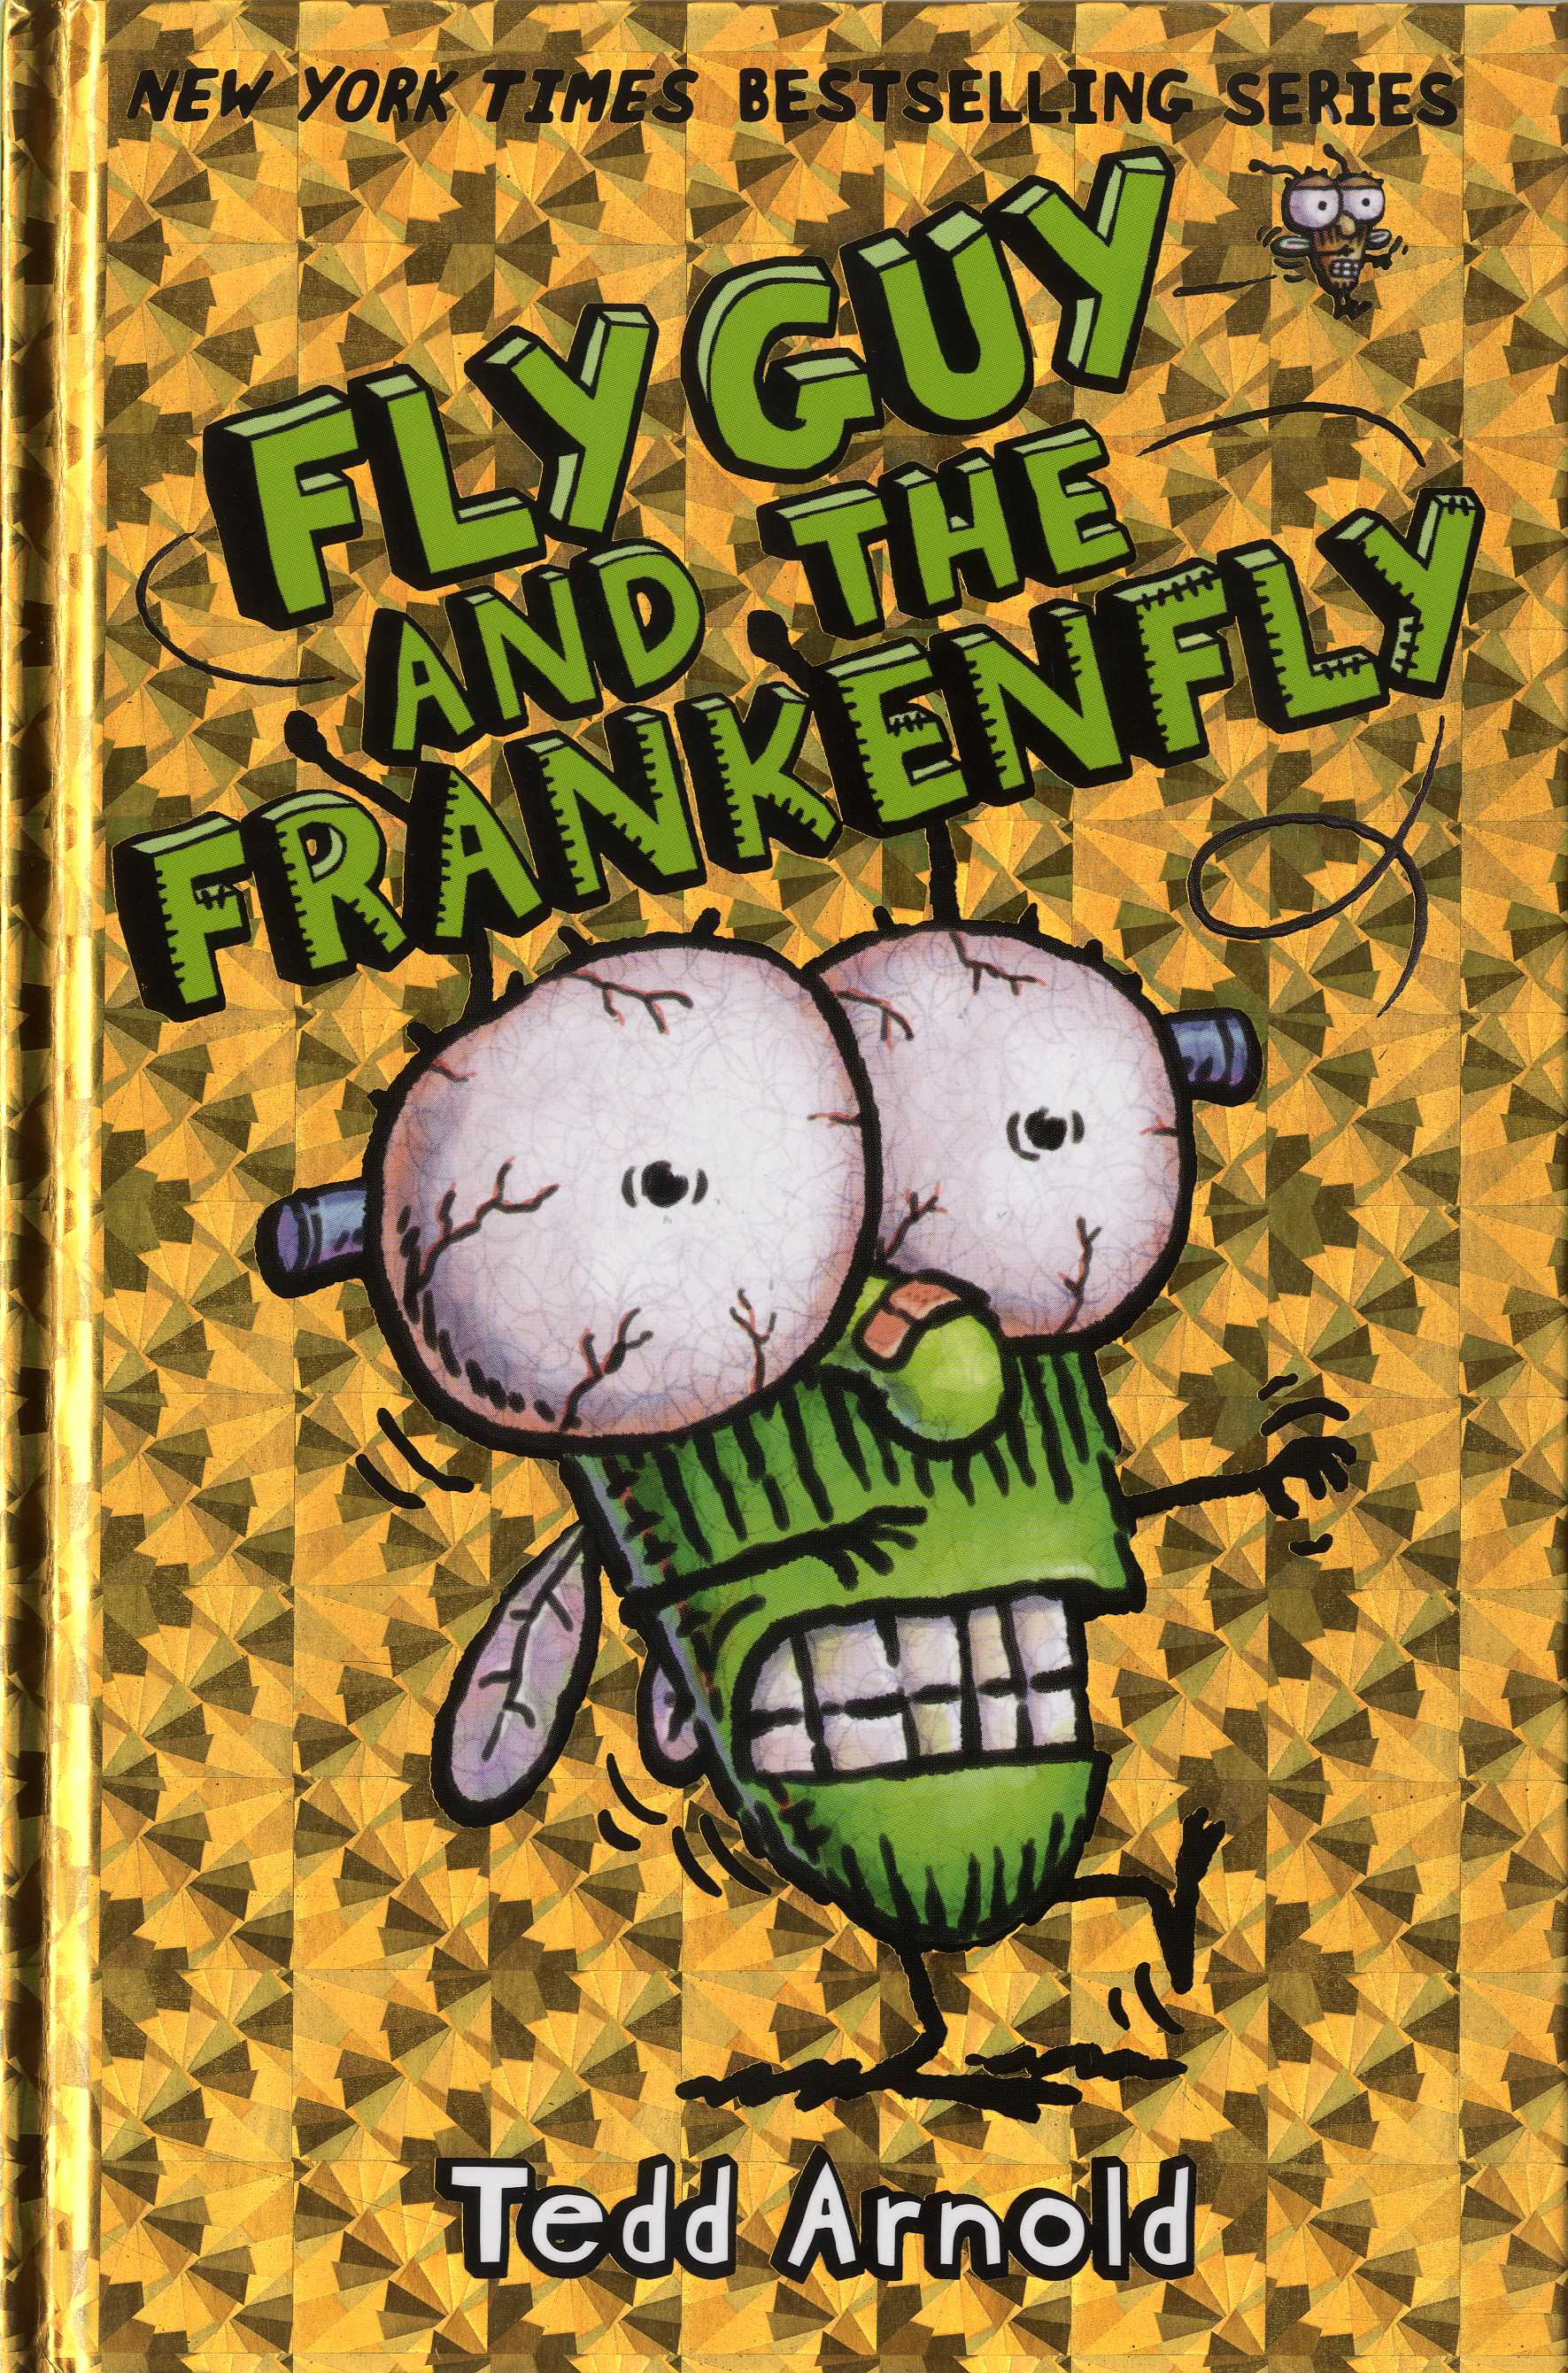 #13:Fly Guy and the Frankenfly (HB)